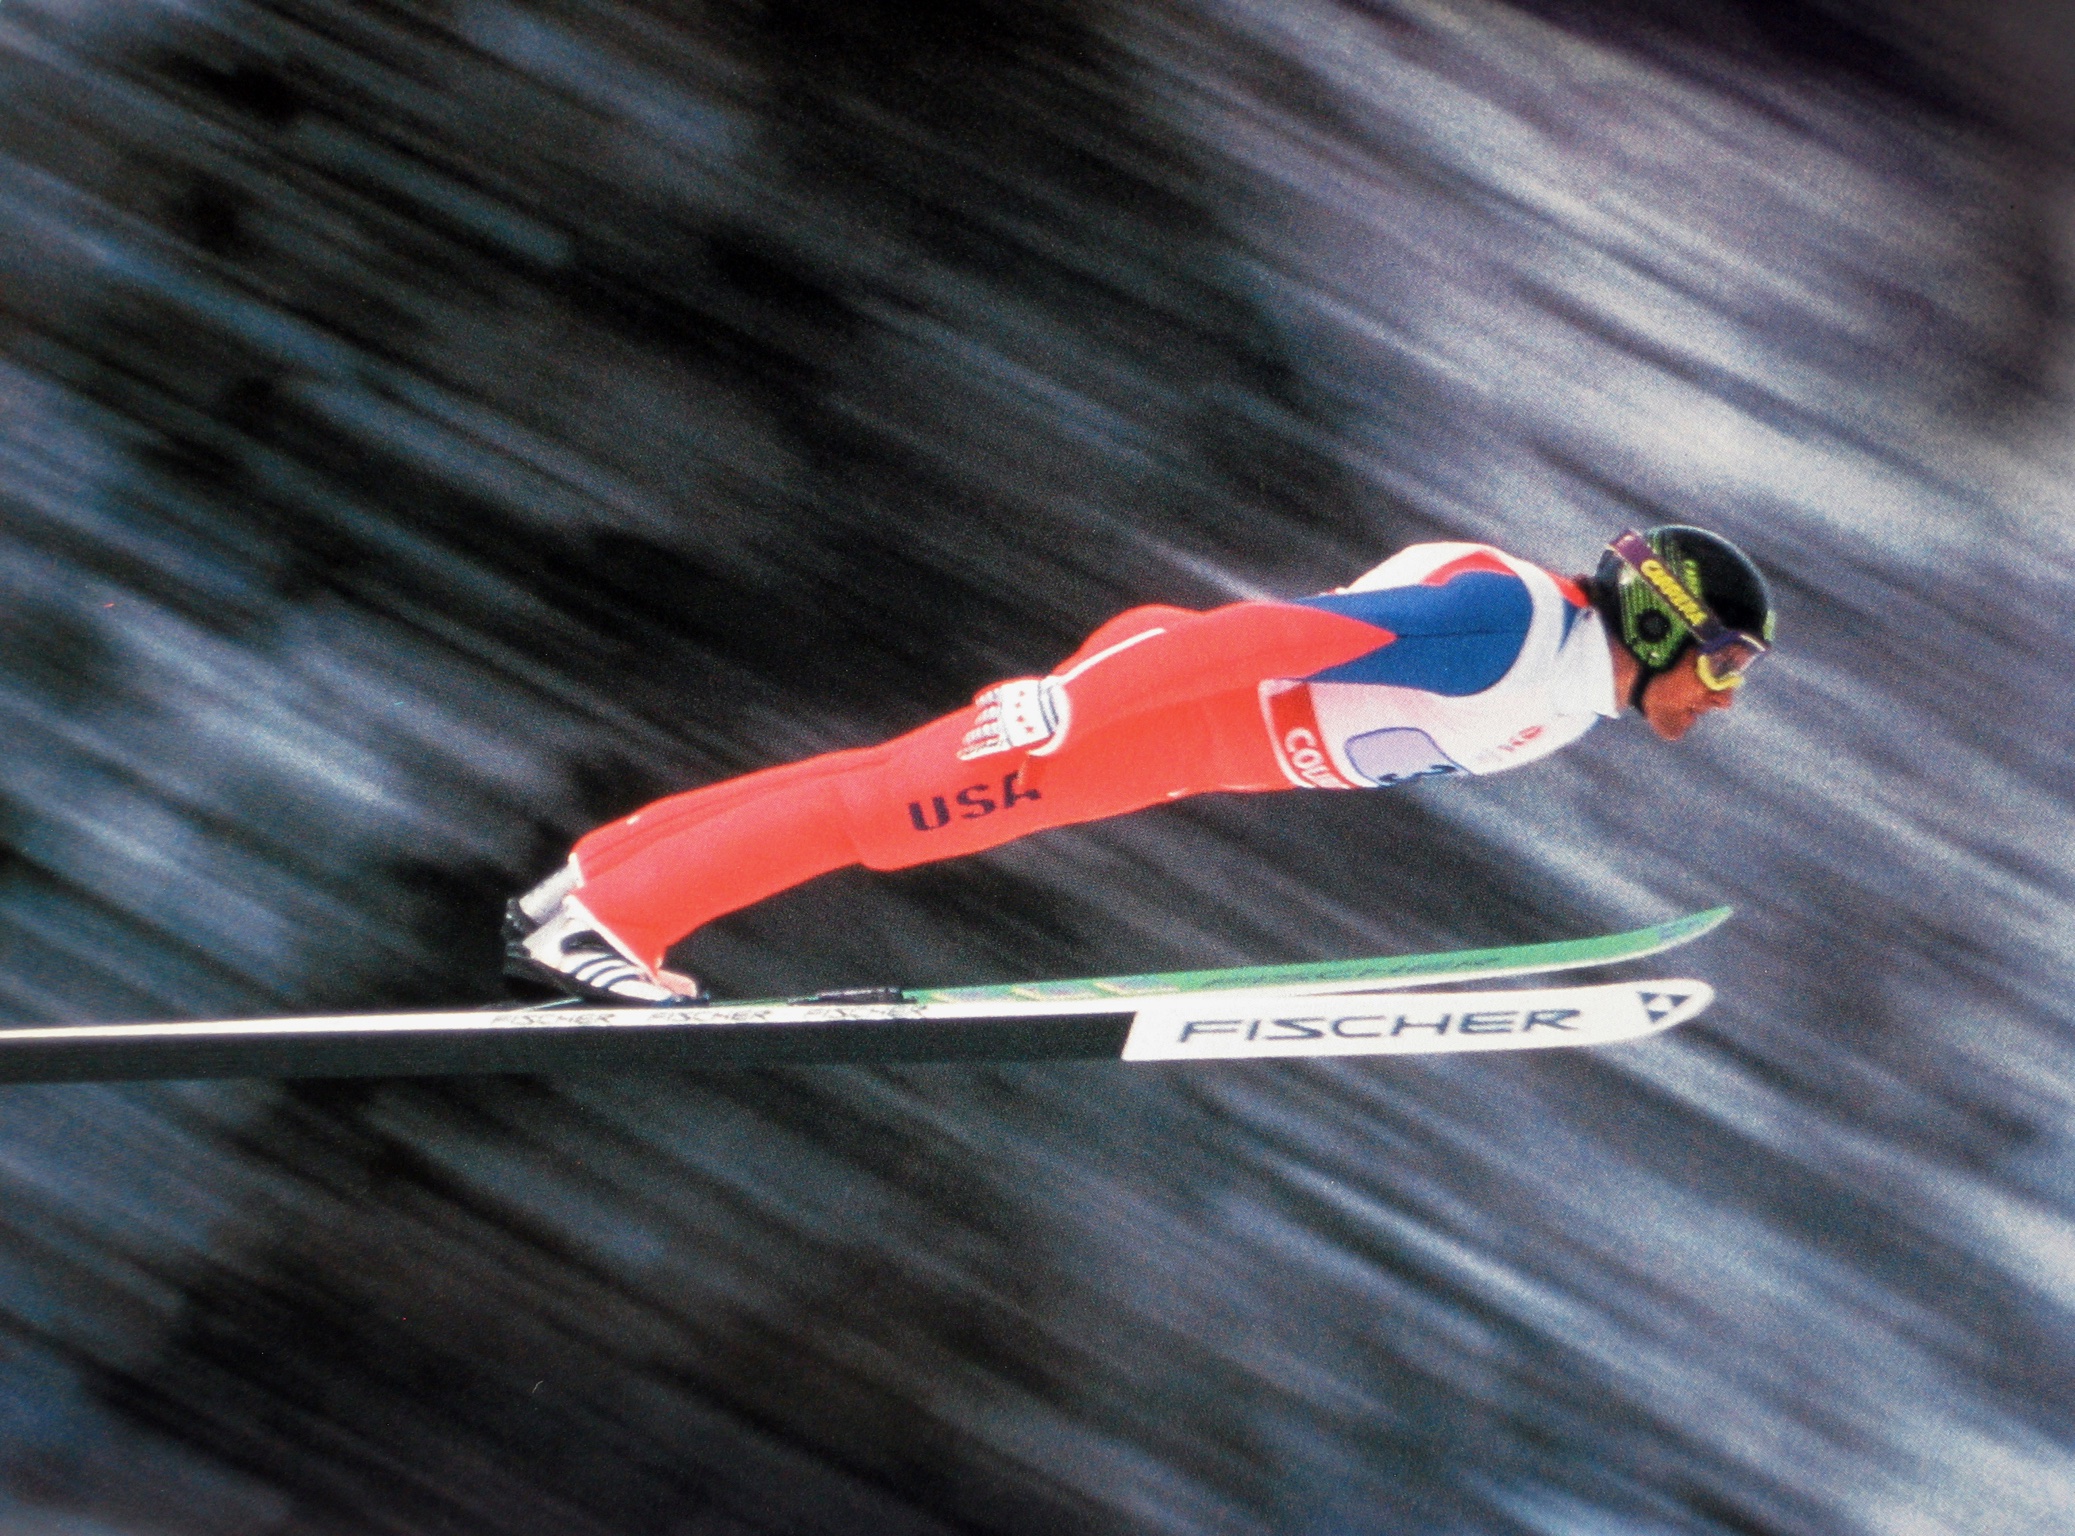 Jim Holland a six-time U.S. national champion and a two-time competitor of the Olympic Winter Games in ski jumping.